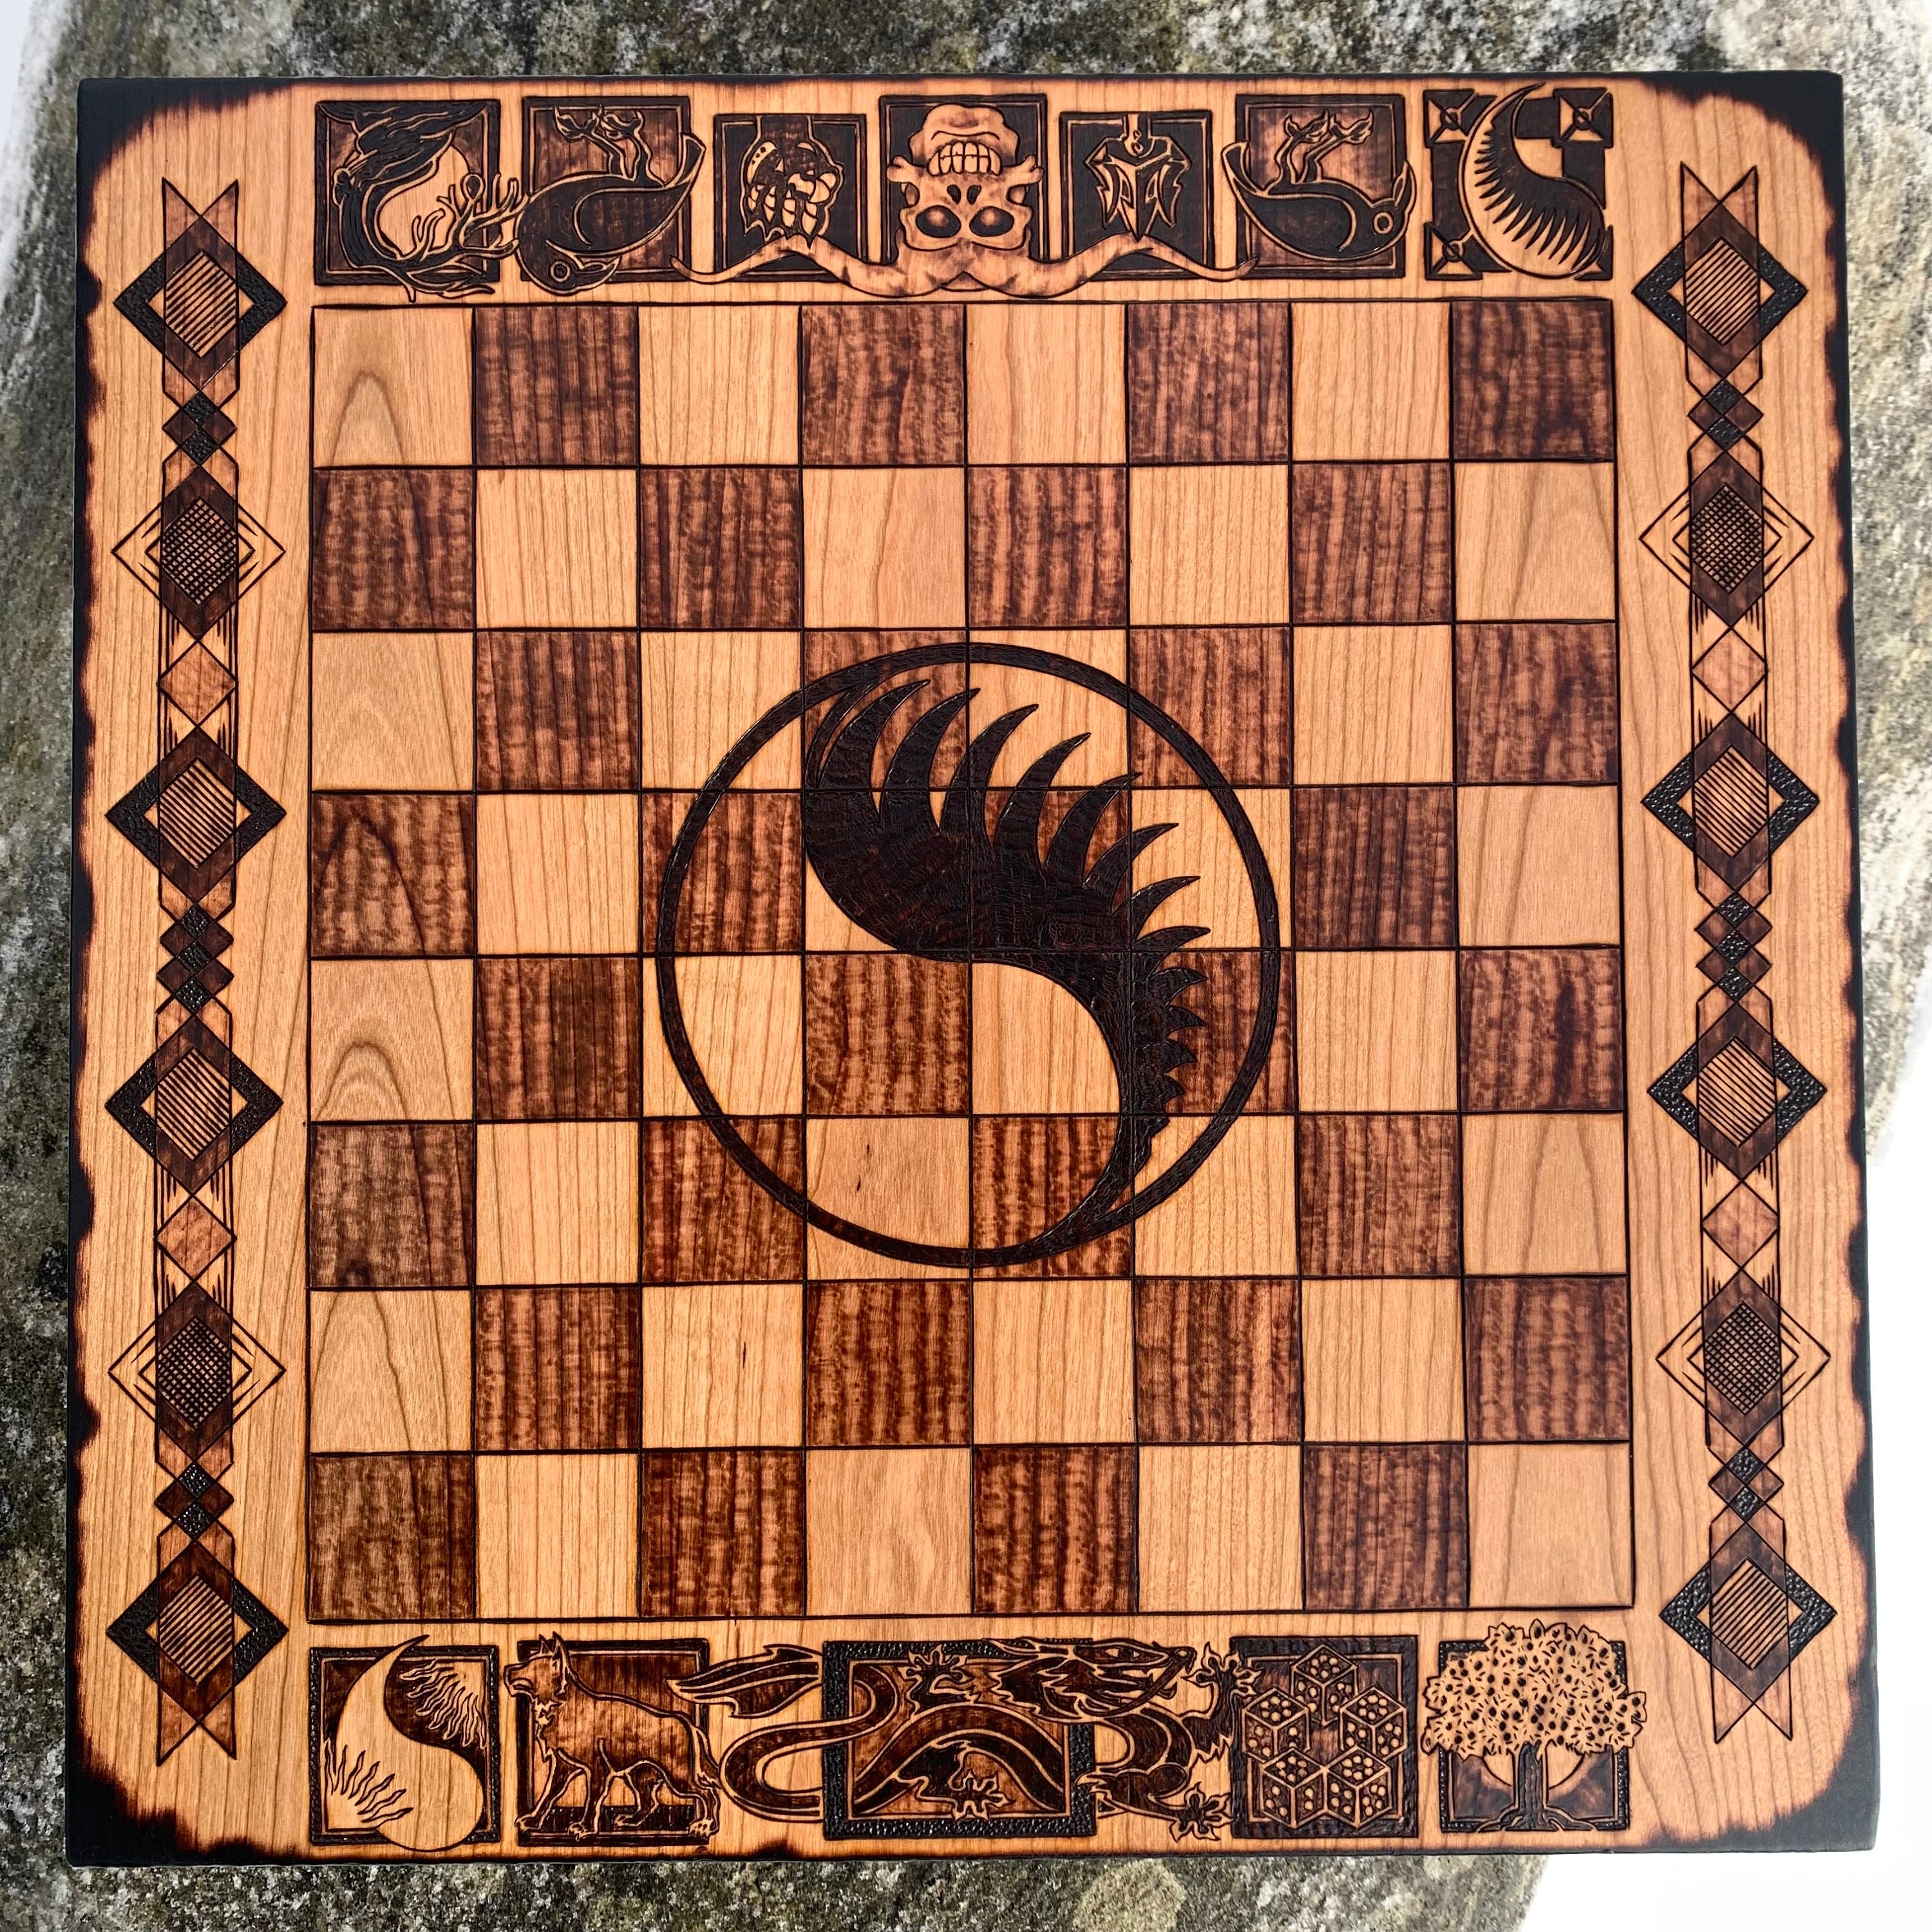 4D Chess', some chess themed art I made : r/chess